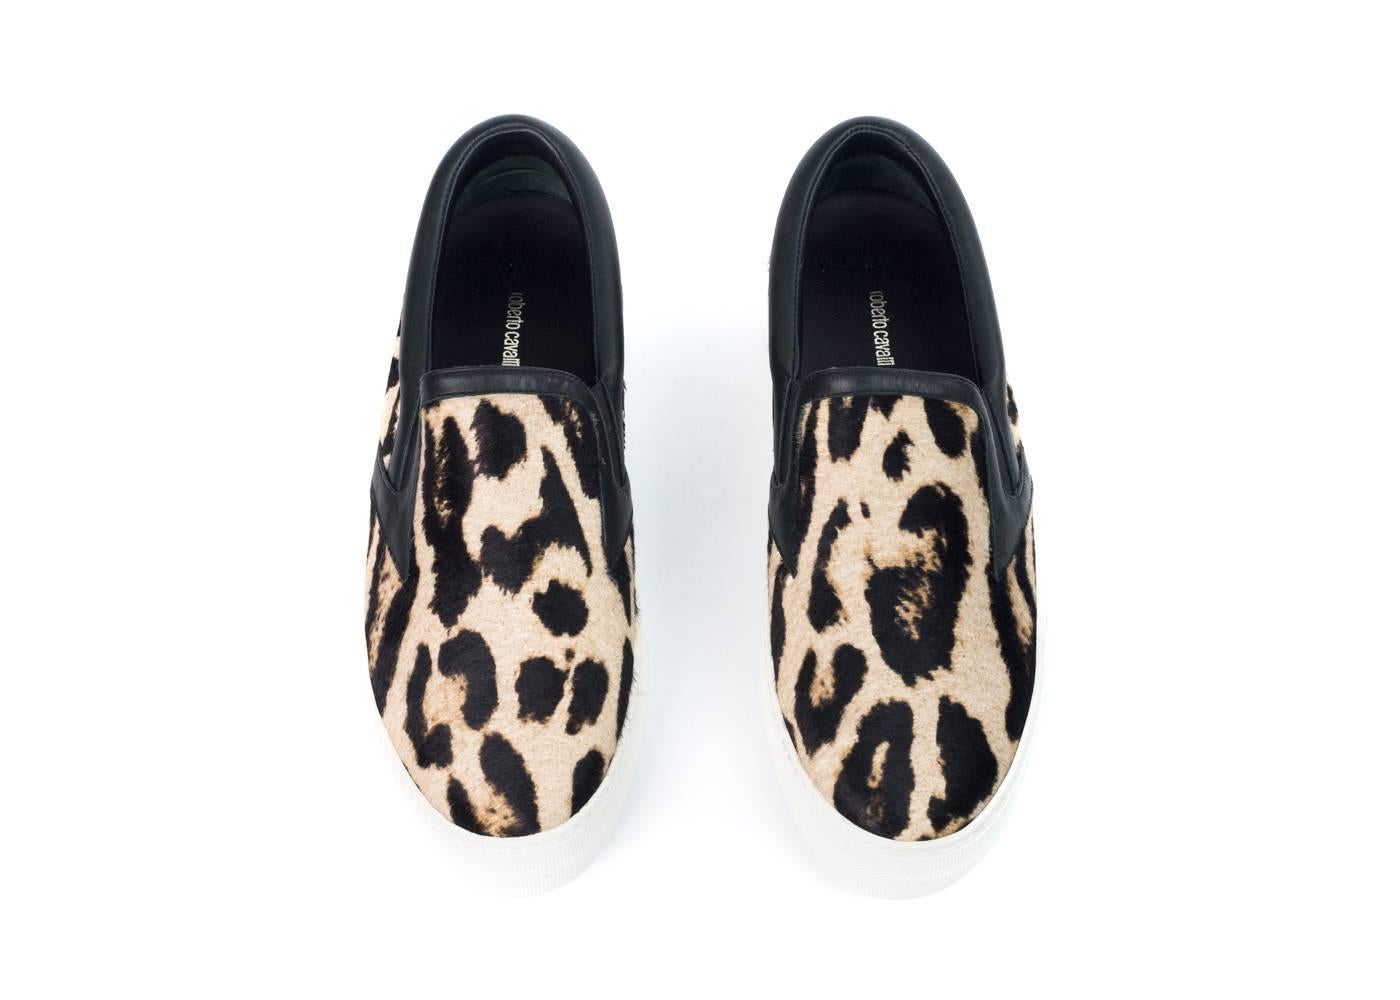 Brand New Roberto Cavalli Slip Ons
Original Box & Dust Bag Included
Retails in Stores & Online for $650
Size IT39 / US9 Fits True to Size

Roberto Cavalli's leather leopard trimmed slip ons made from 100% Italian calfskin leather. These slip ons are